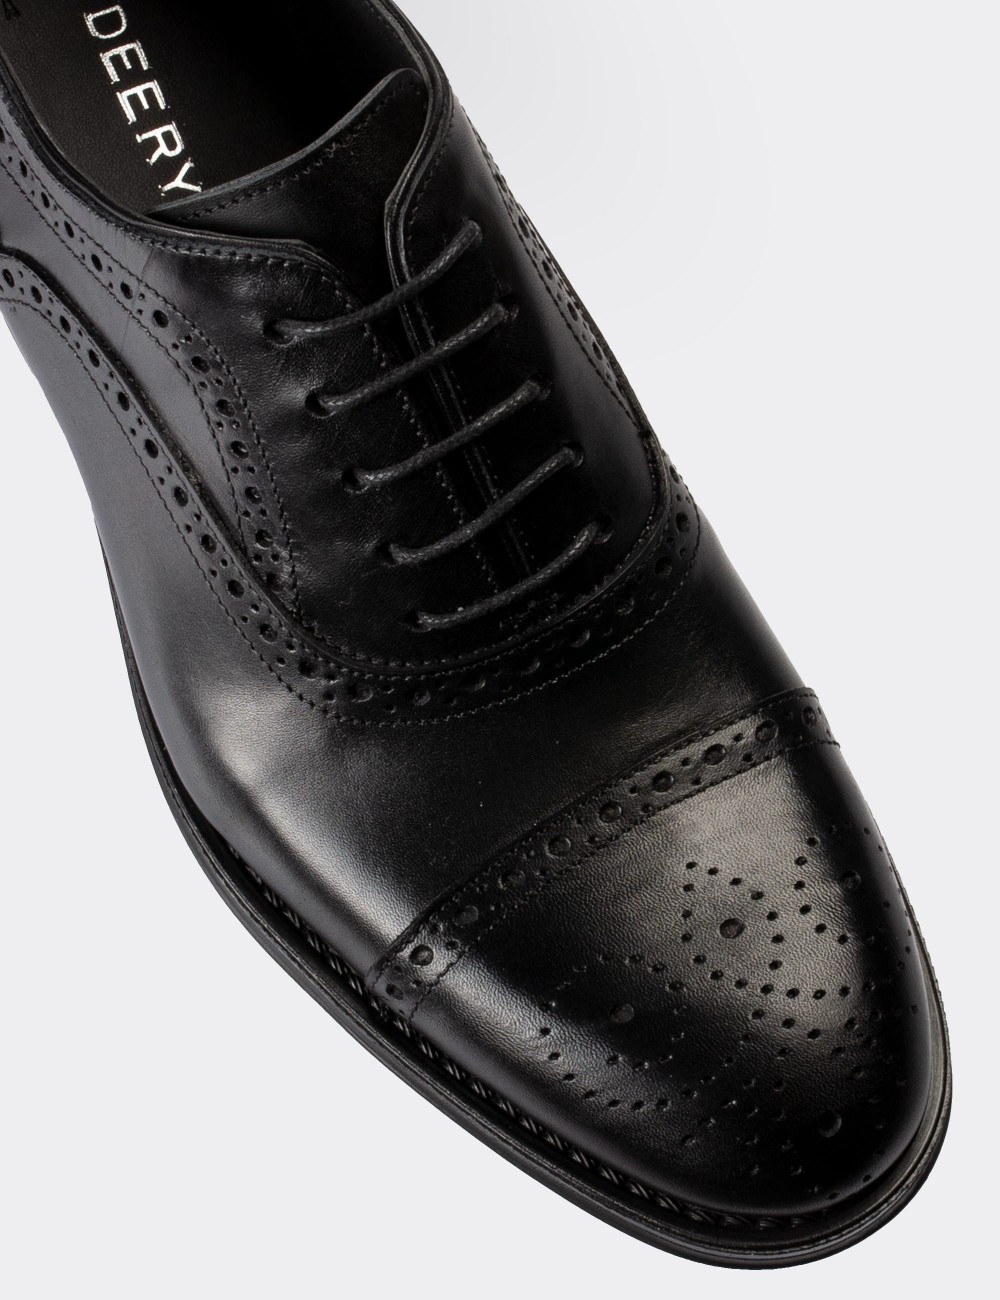 Black  Leather Classic Shoes - 01813MSYHC01